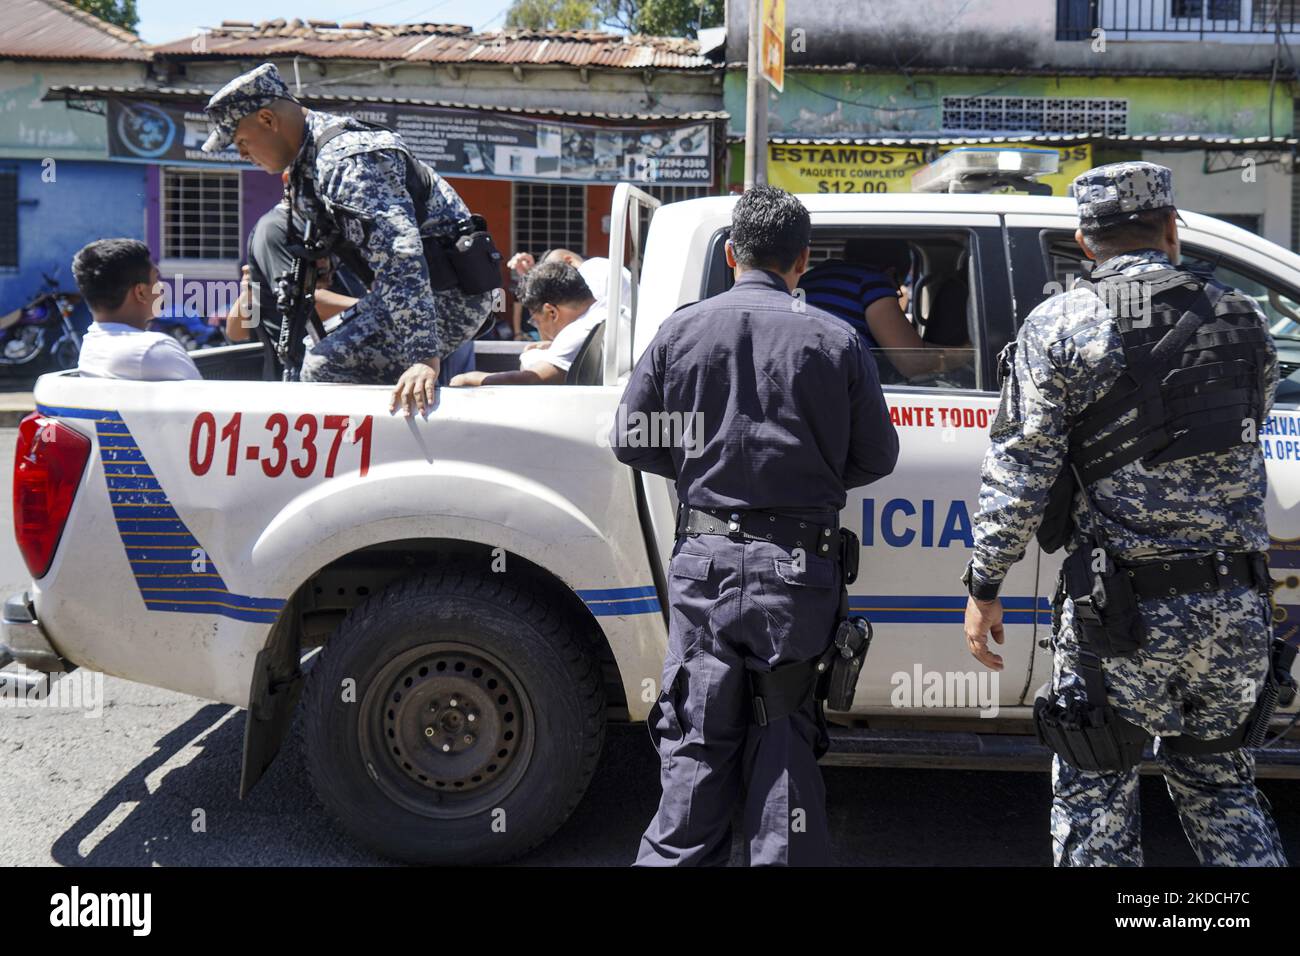 A police officer escorts alleged gang members into a detention center on June 22, 2022 in San Salvador, El Salvador. The Salvadoran government through the Salvadoran Congress extended a state of emergency put in place to hit gang structures for the fourth month in a row as the government reports more than 41,000 alleged gang members captured (Photo by Camilo Freedman/NurPhoto) Stock Photo